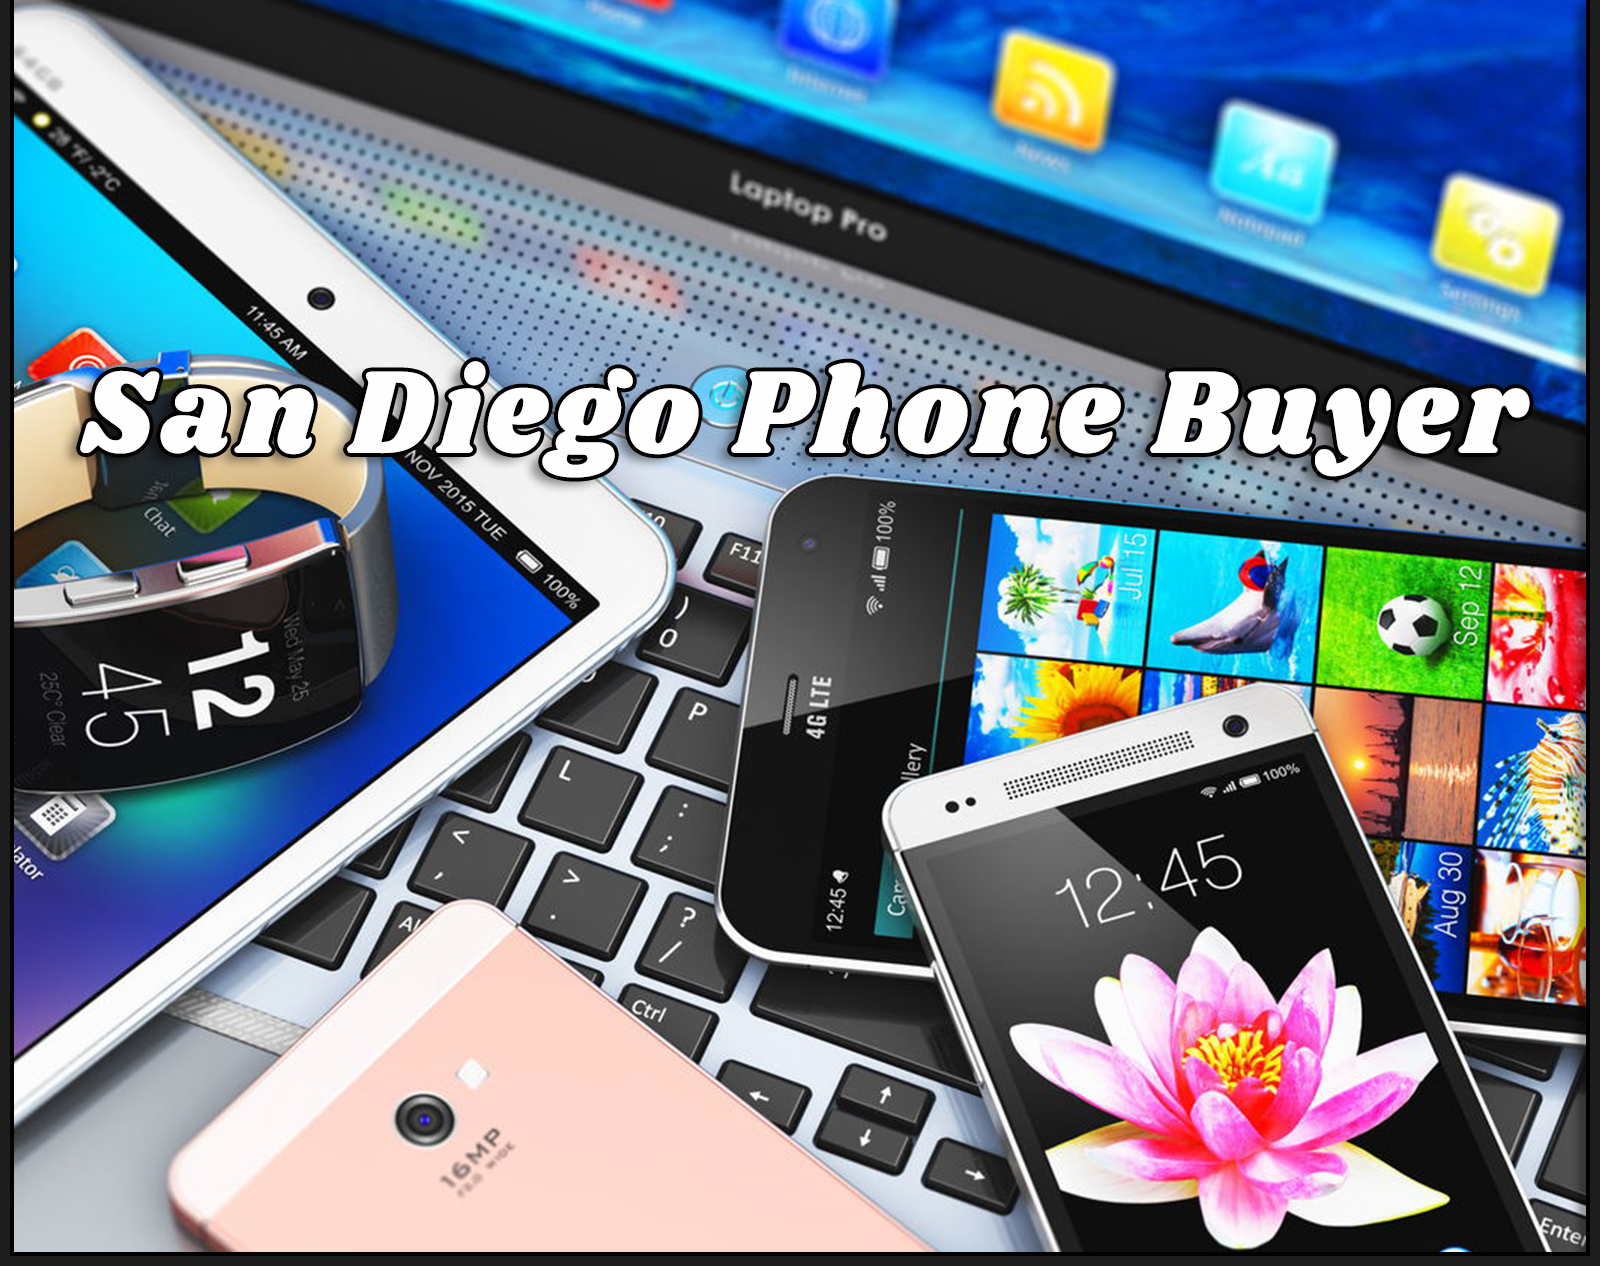 Professional Mobile Device / Phone Buyer San Diego